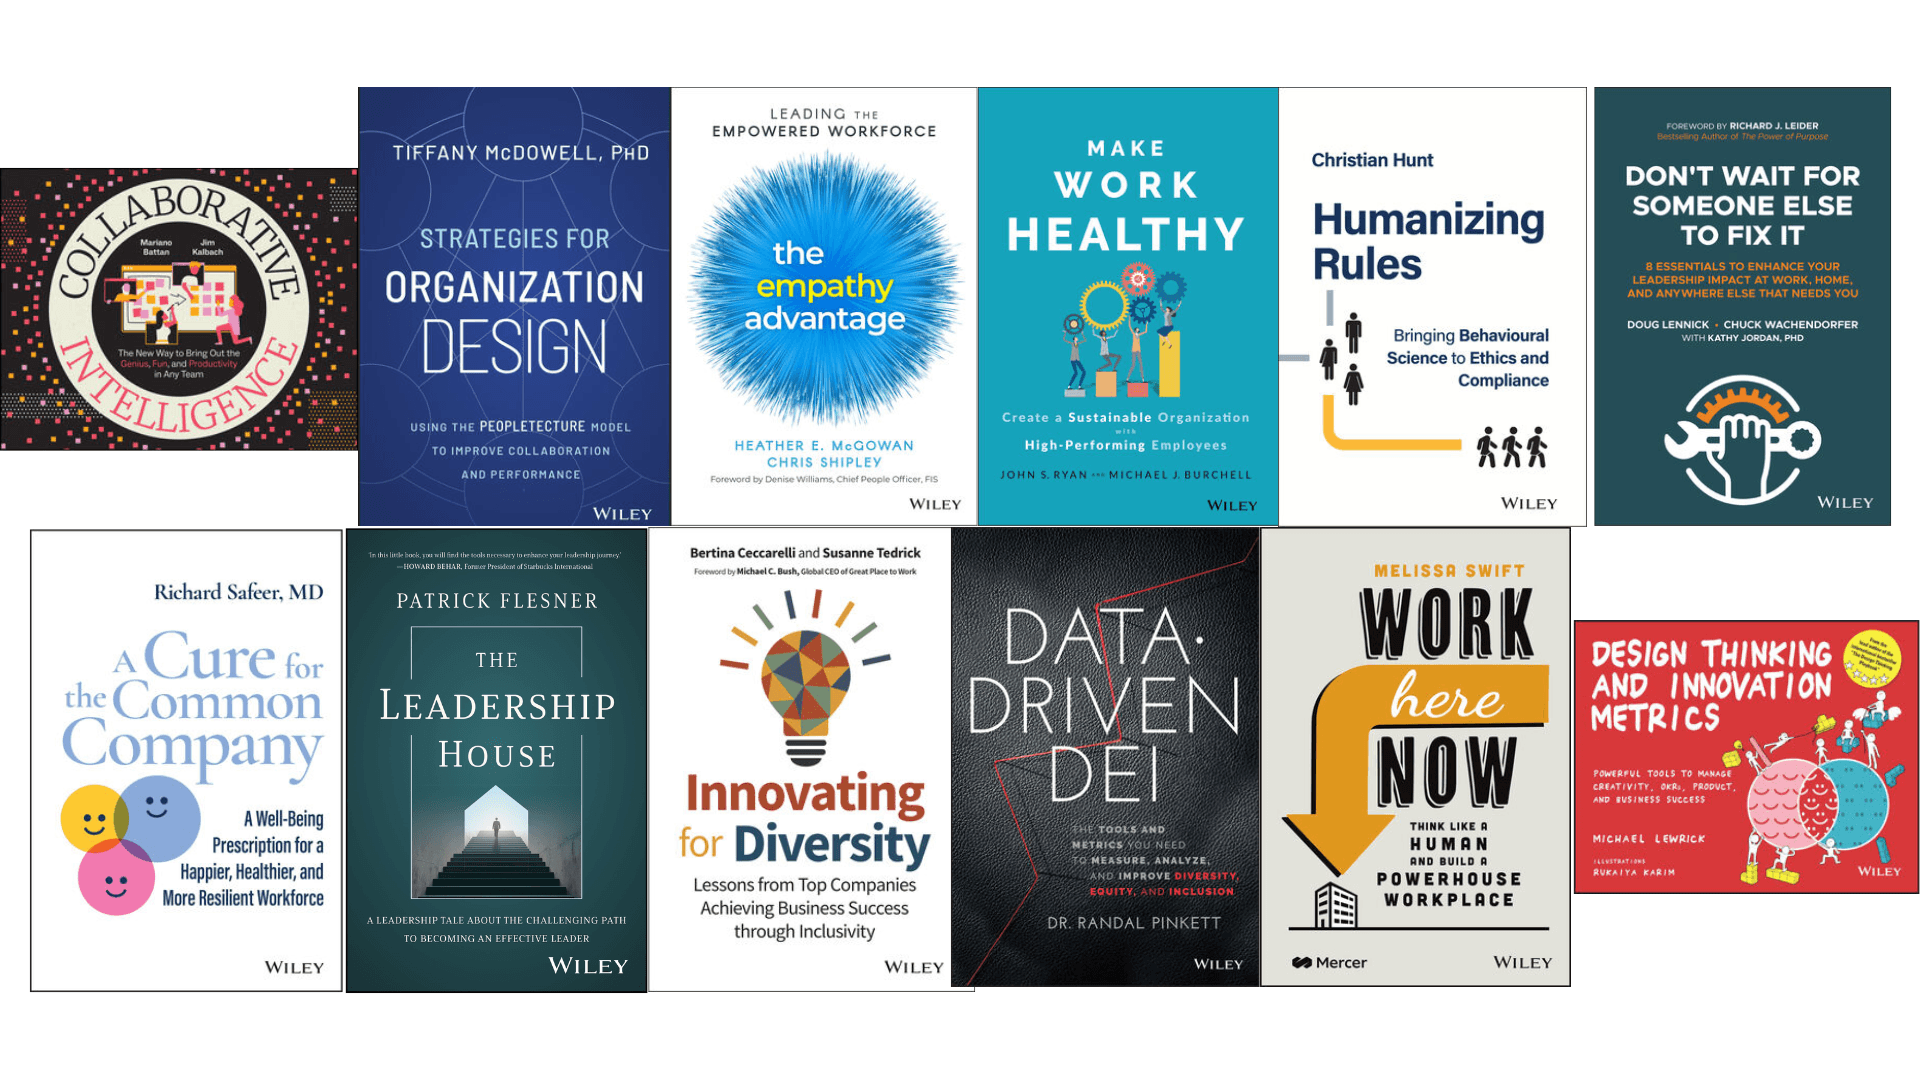 The Leadership And Professional Development Books By Wiley For Businesses, Individuals, And Corporates.png